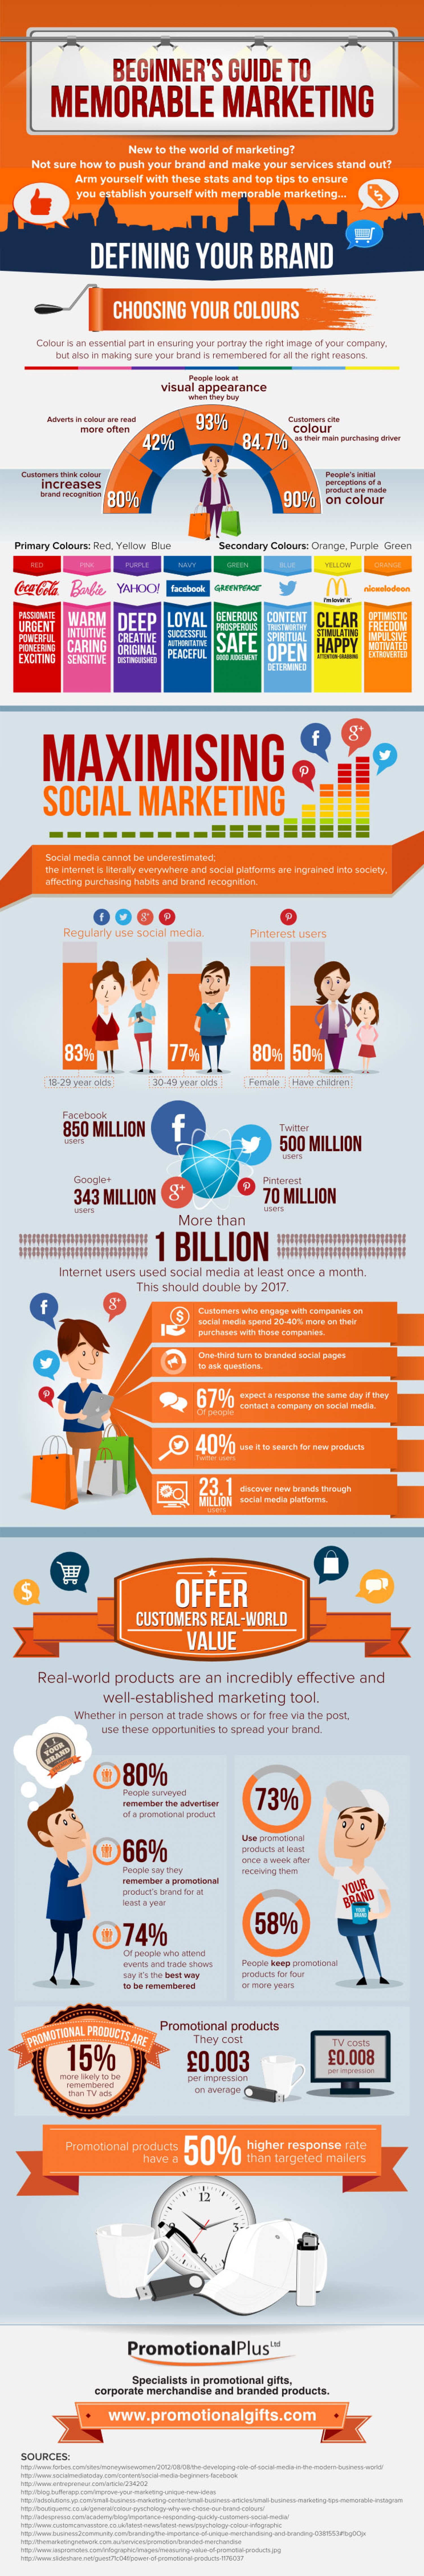 Infographic Target Market’s Attention with Epic Brand Marketing 